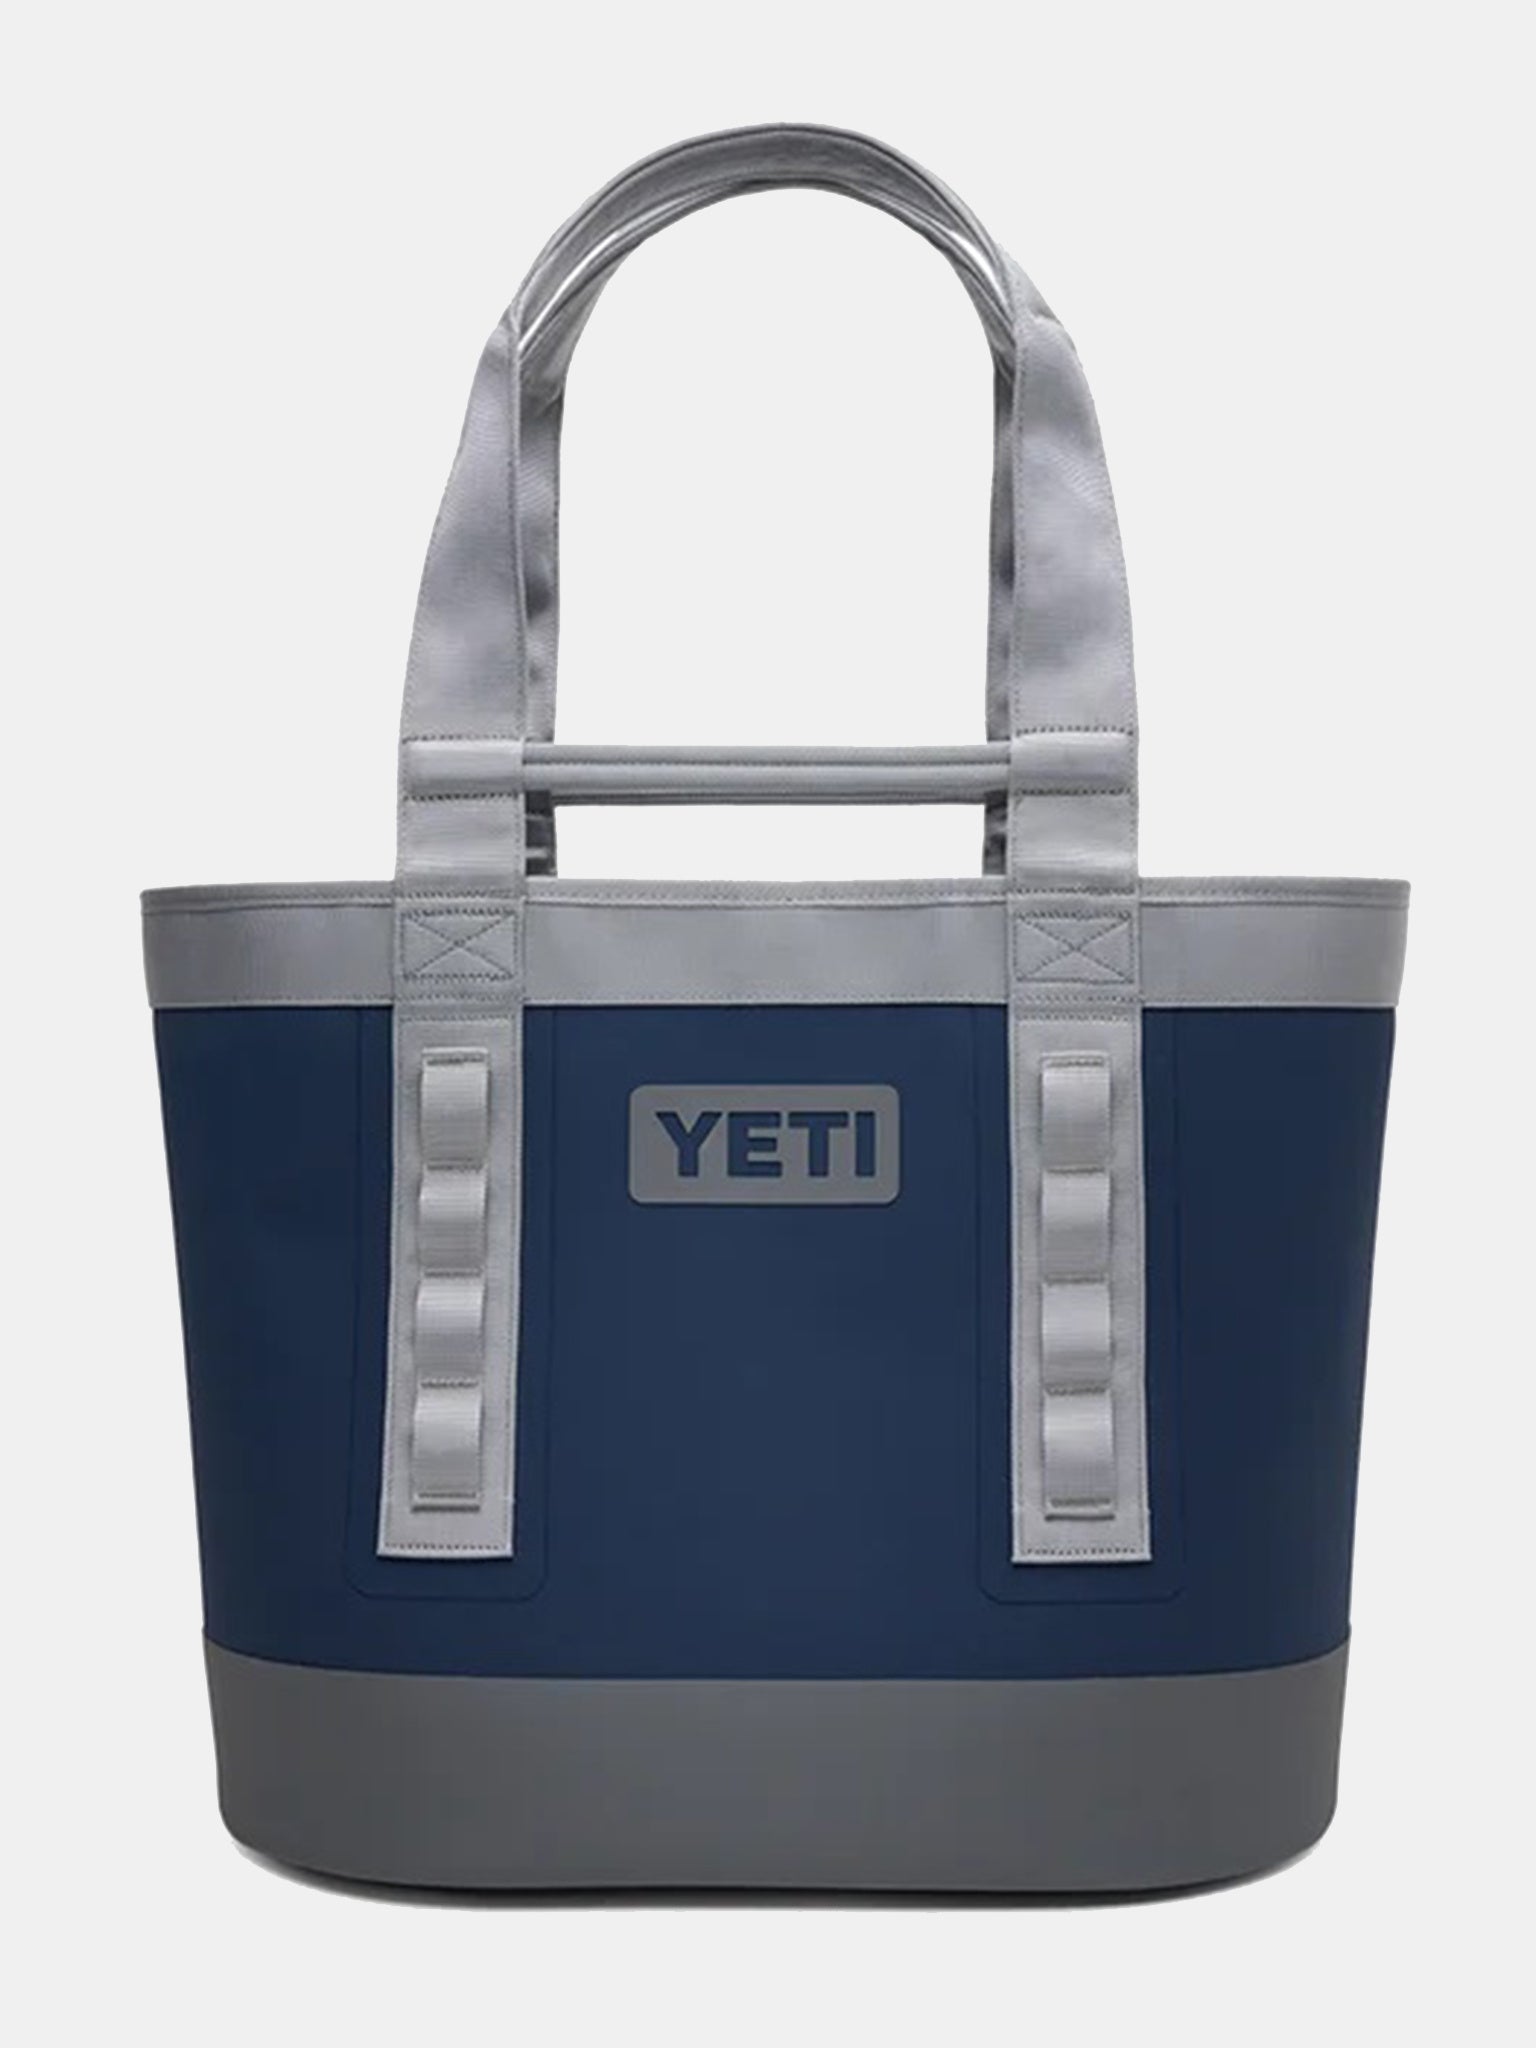 YETI CAMINO 35 CARRYALL TOTE BEACH BAG RARE DISCONTINUED CORAL COLOR NWOT  LE